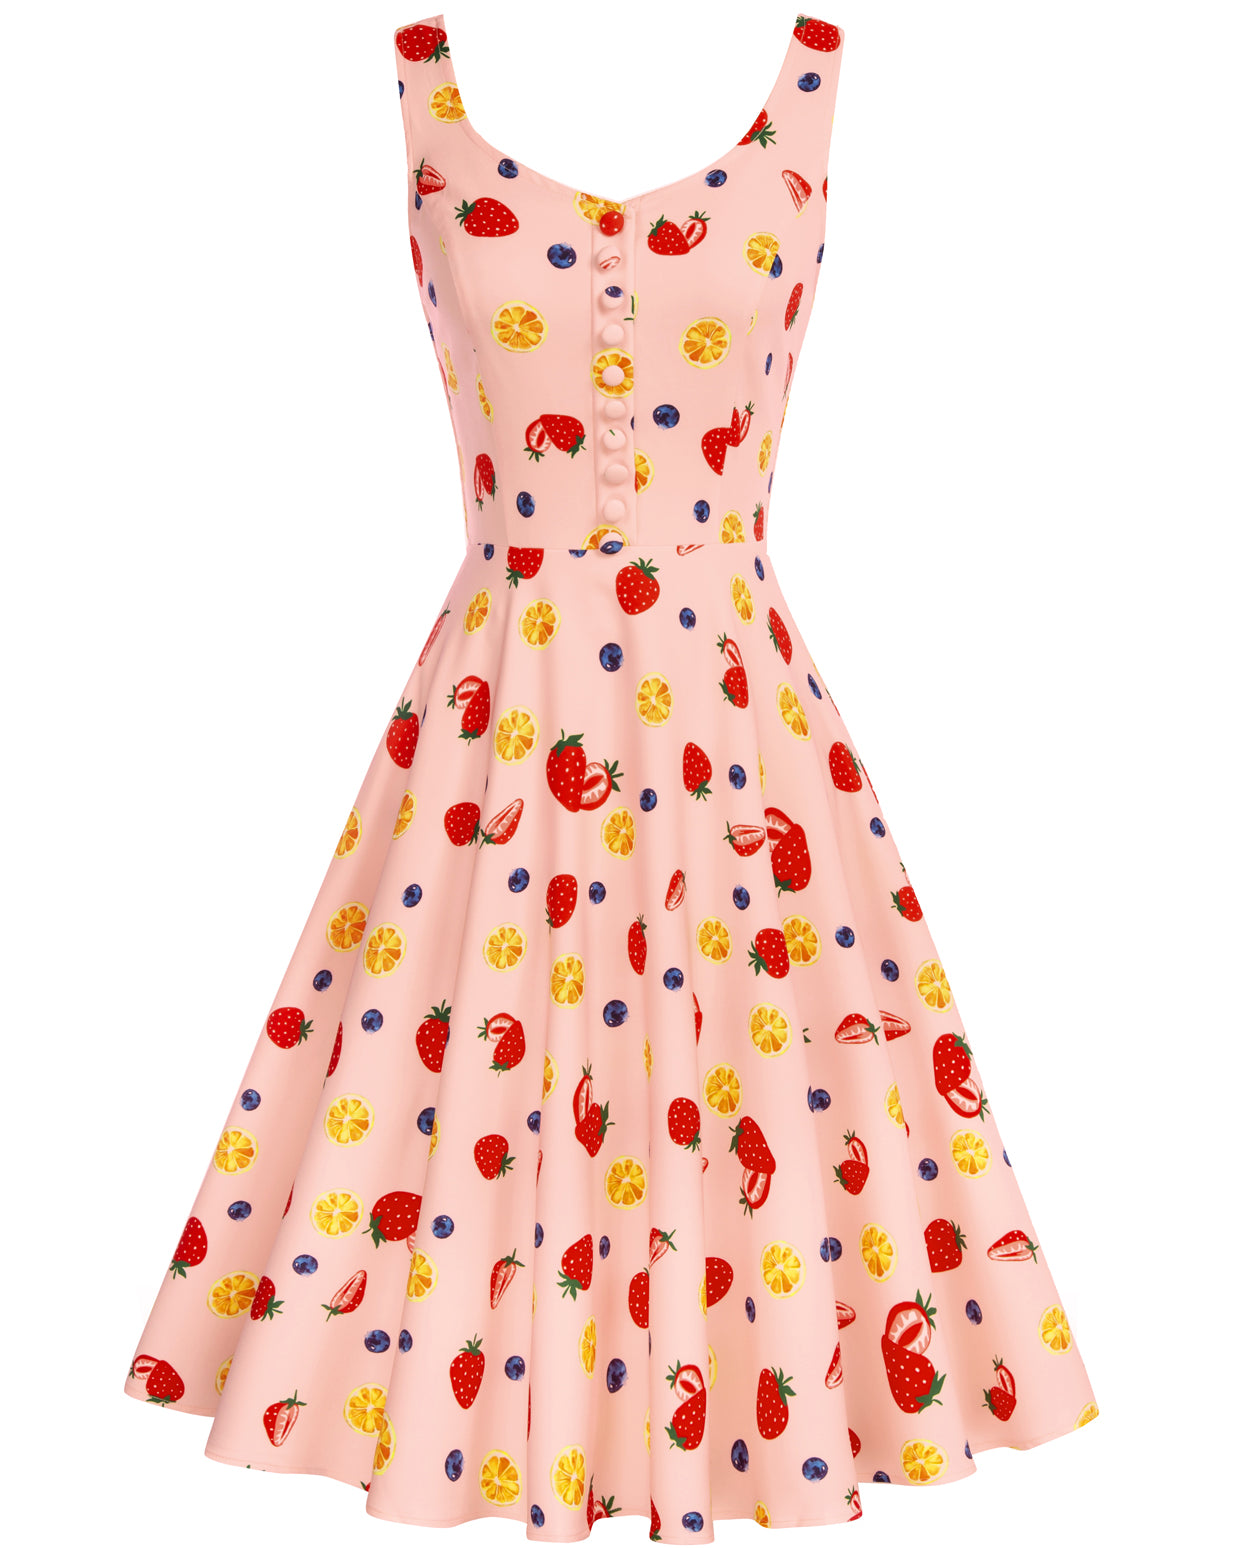 1950s Vintage Sleeveless Fruit Pattern A-Line Dress - Belle Poque Offcial